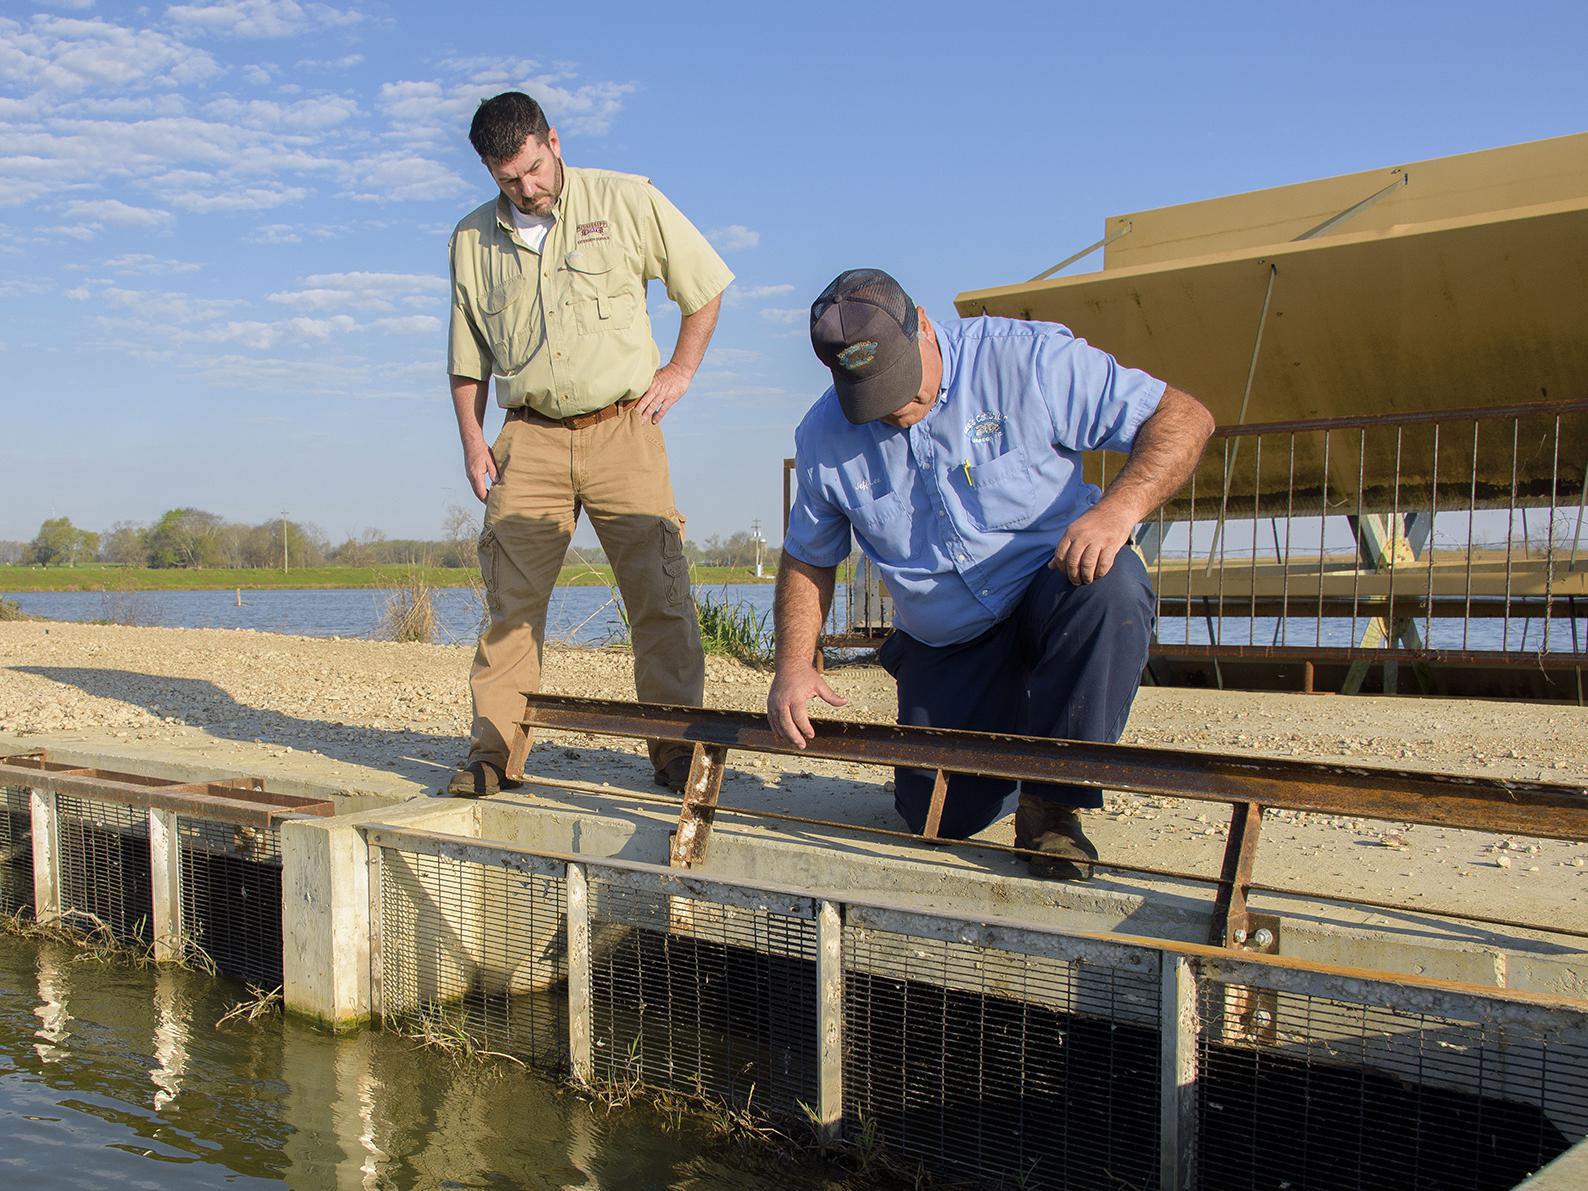 Split-cell catfish ponds circulate oxygen-rich water from the larger lagoon through channels to the smaller side where catfish grow. On March 21, 2017, Mississippi State University Extension aquaculture specialist Mark Peterman, left, and Jeff Lee of Lee’s Catfish in Macon examined the fencing that contains fish in this Noxubee County catfish pond. (Photo by MSU Extension Service/Kevin Hudson)